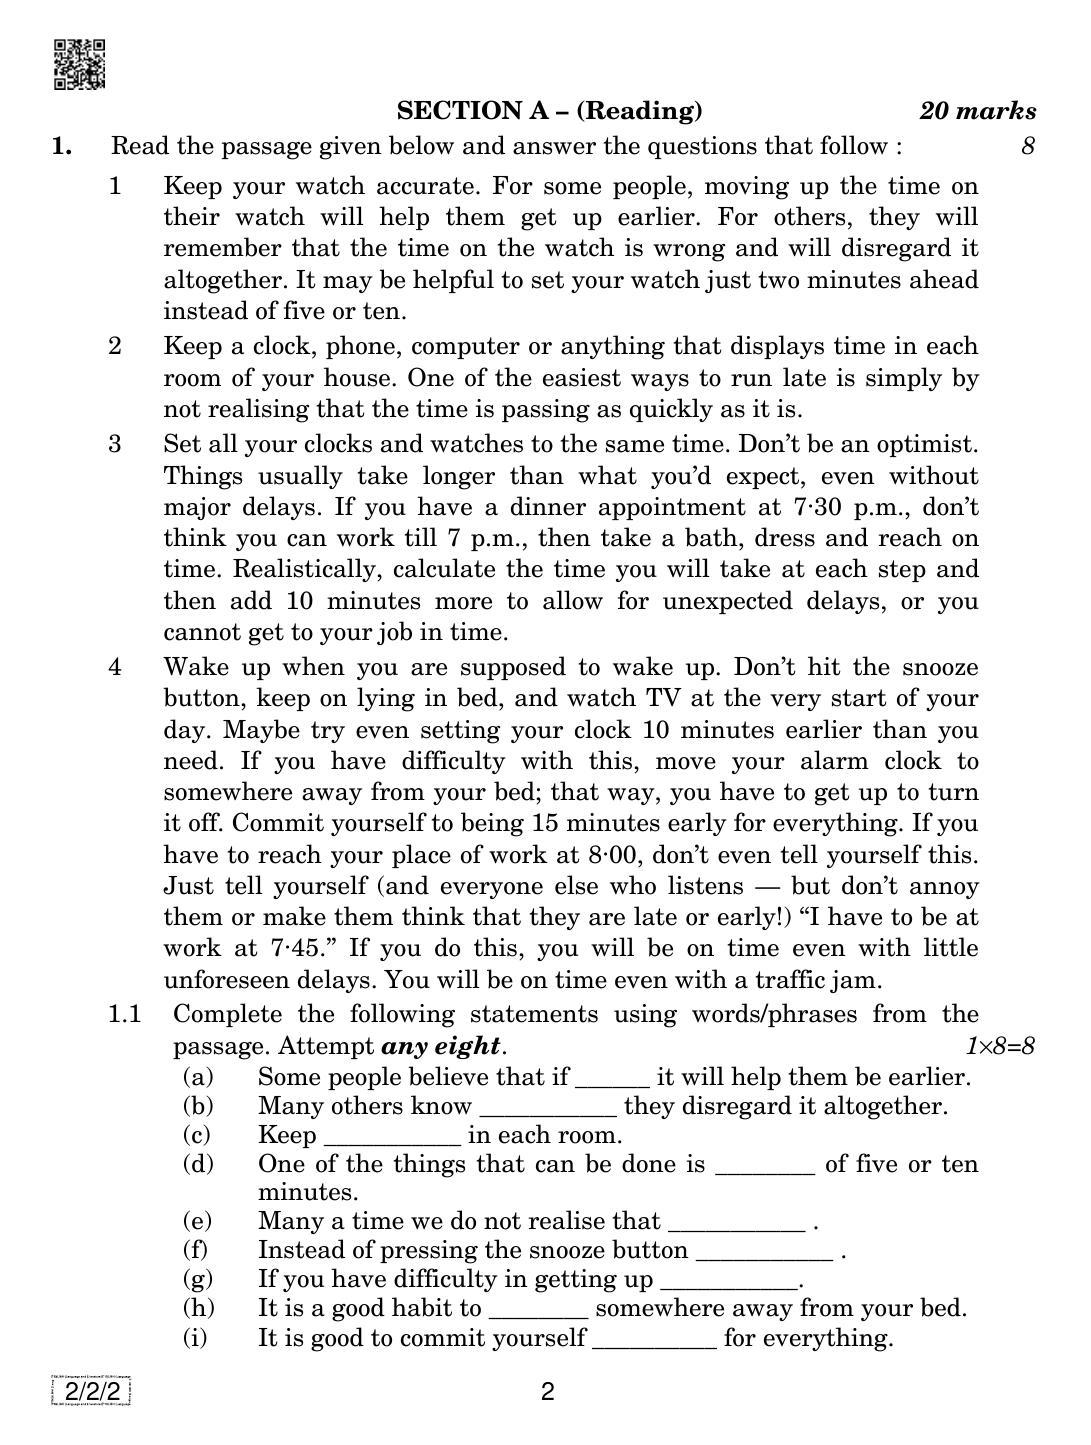 CBSE Class 10 2-2-2  ENGLISH LANGUAGE AND LETERATURE 2019 Question Paper - Page 2